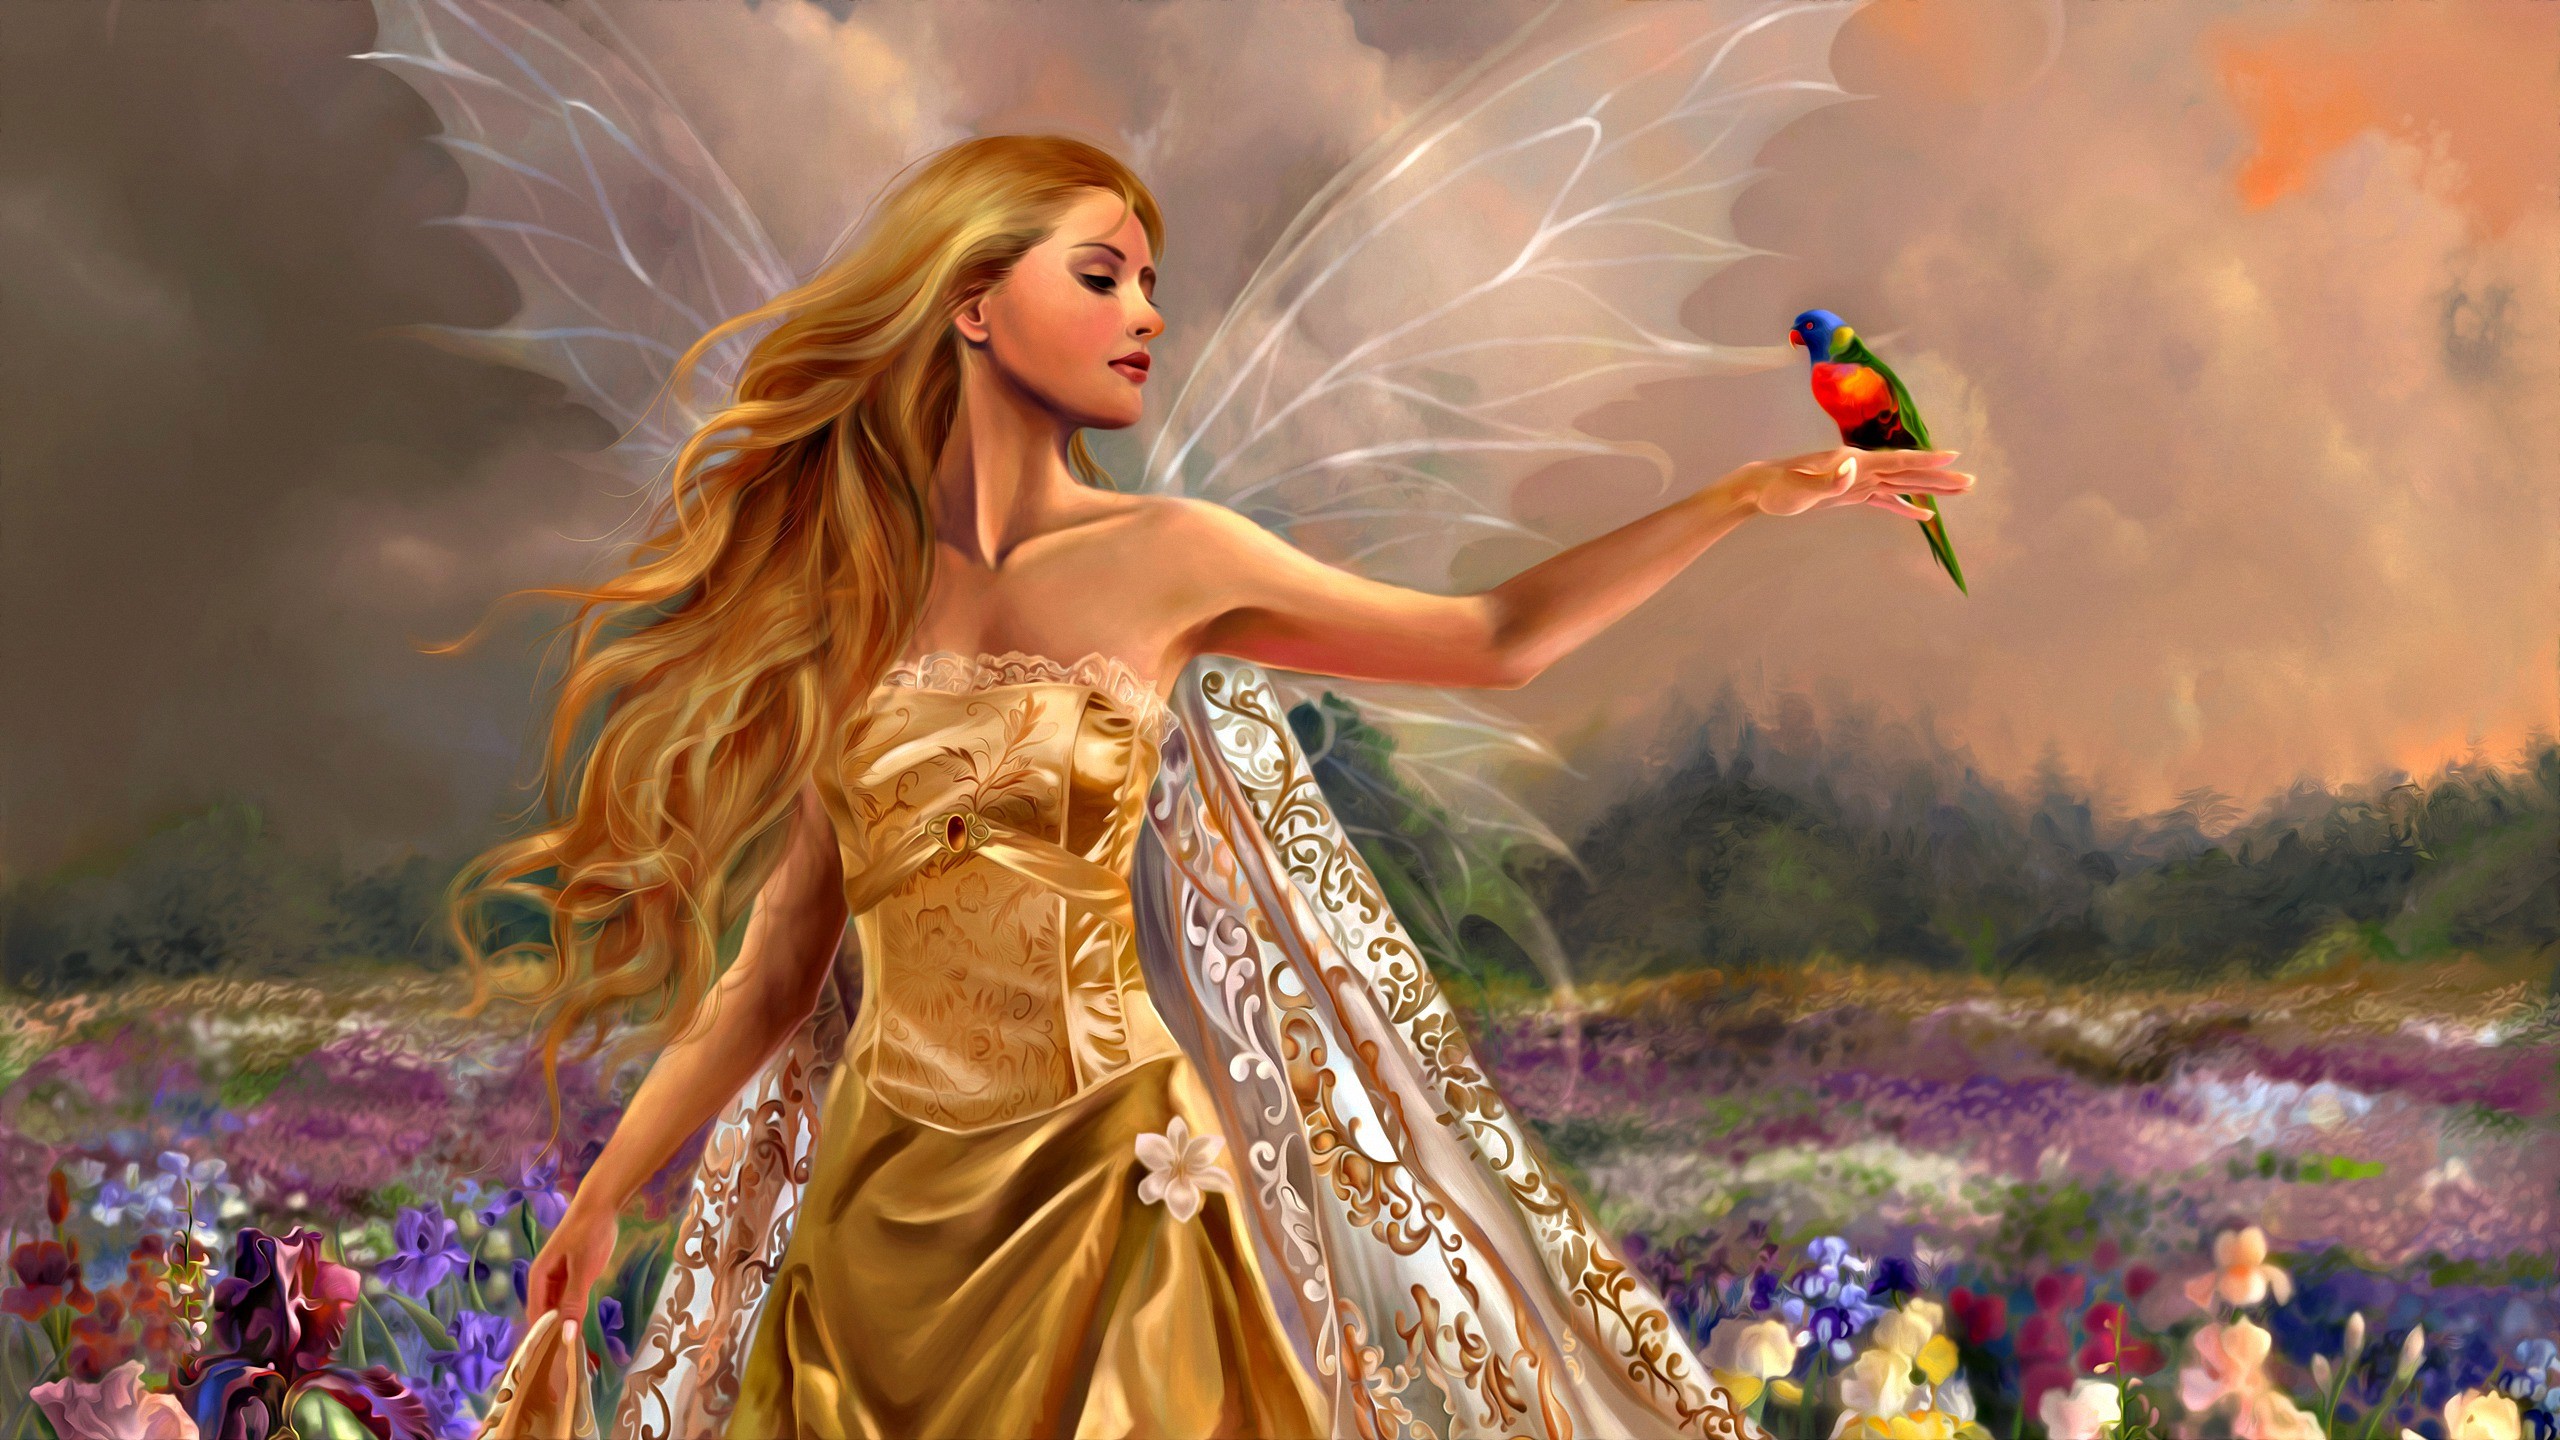 2560x1440 Collection of Animated Fairy Wallpaper on HDWallpapers Animated Fairy  Wallpapers